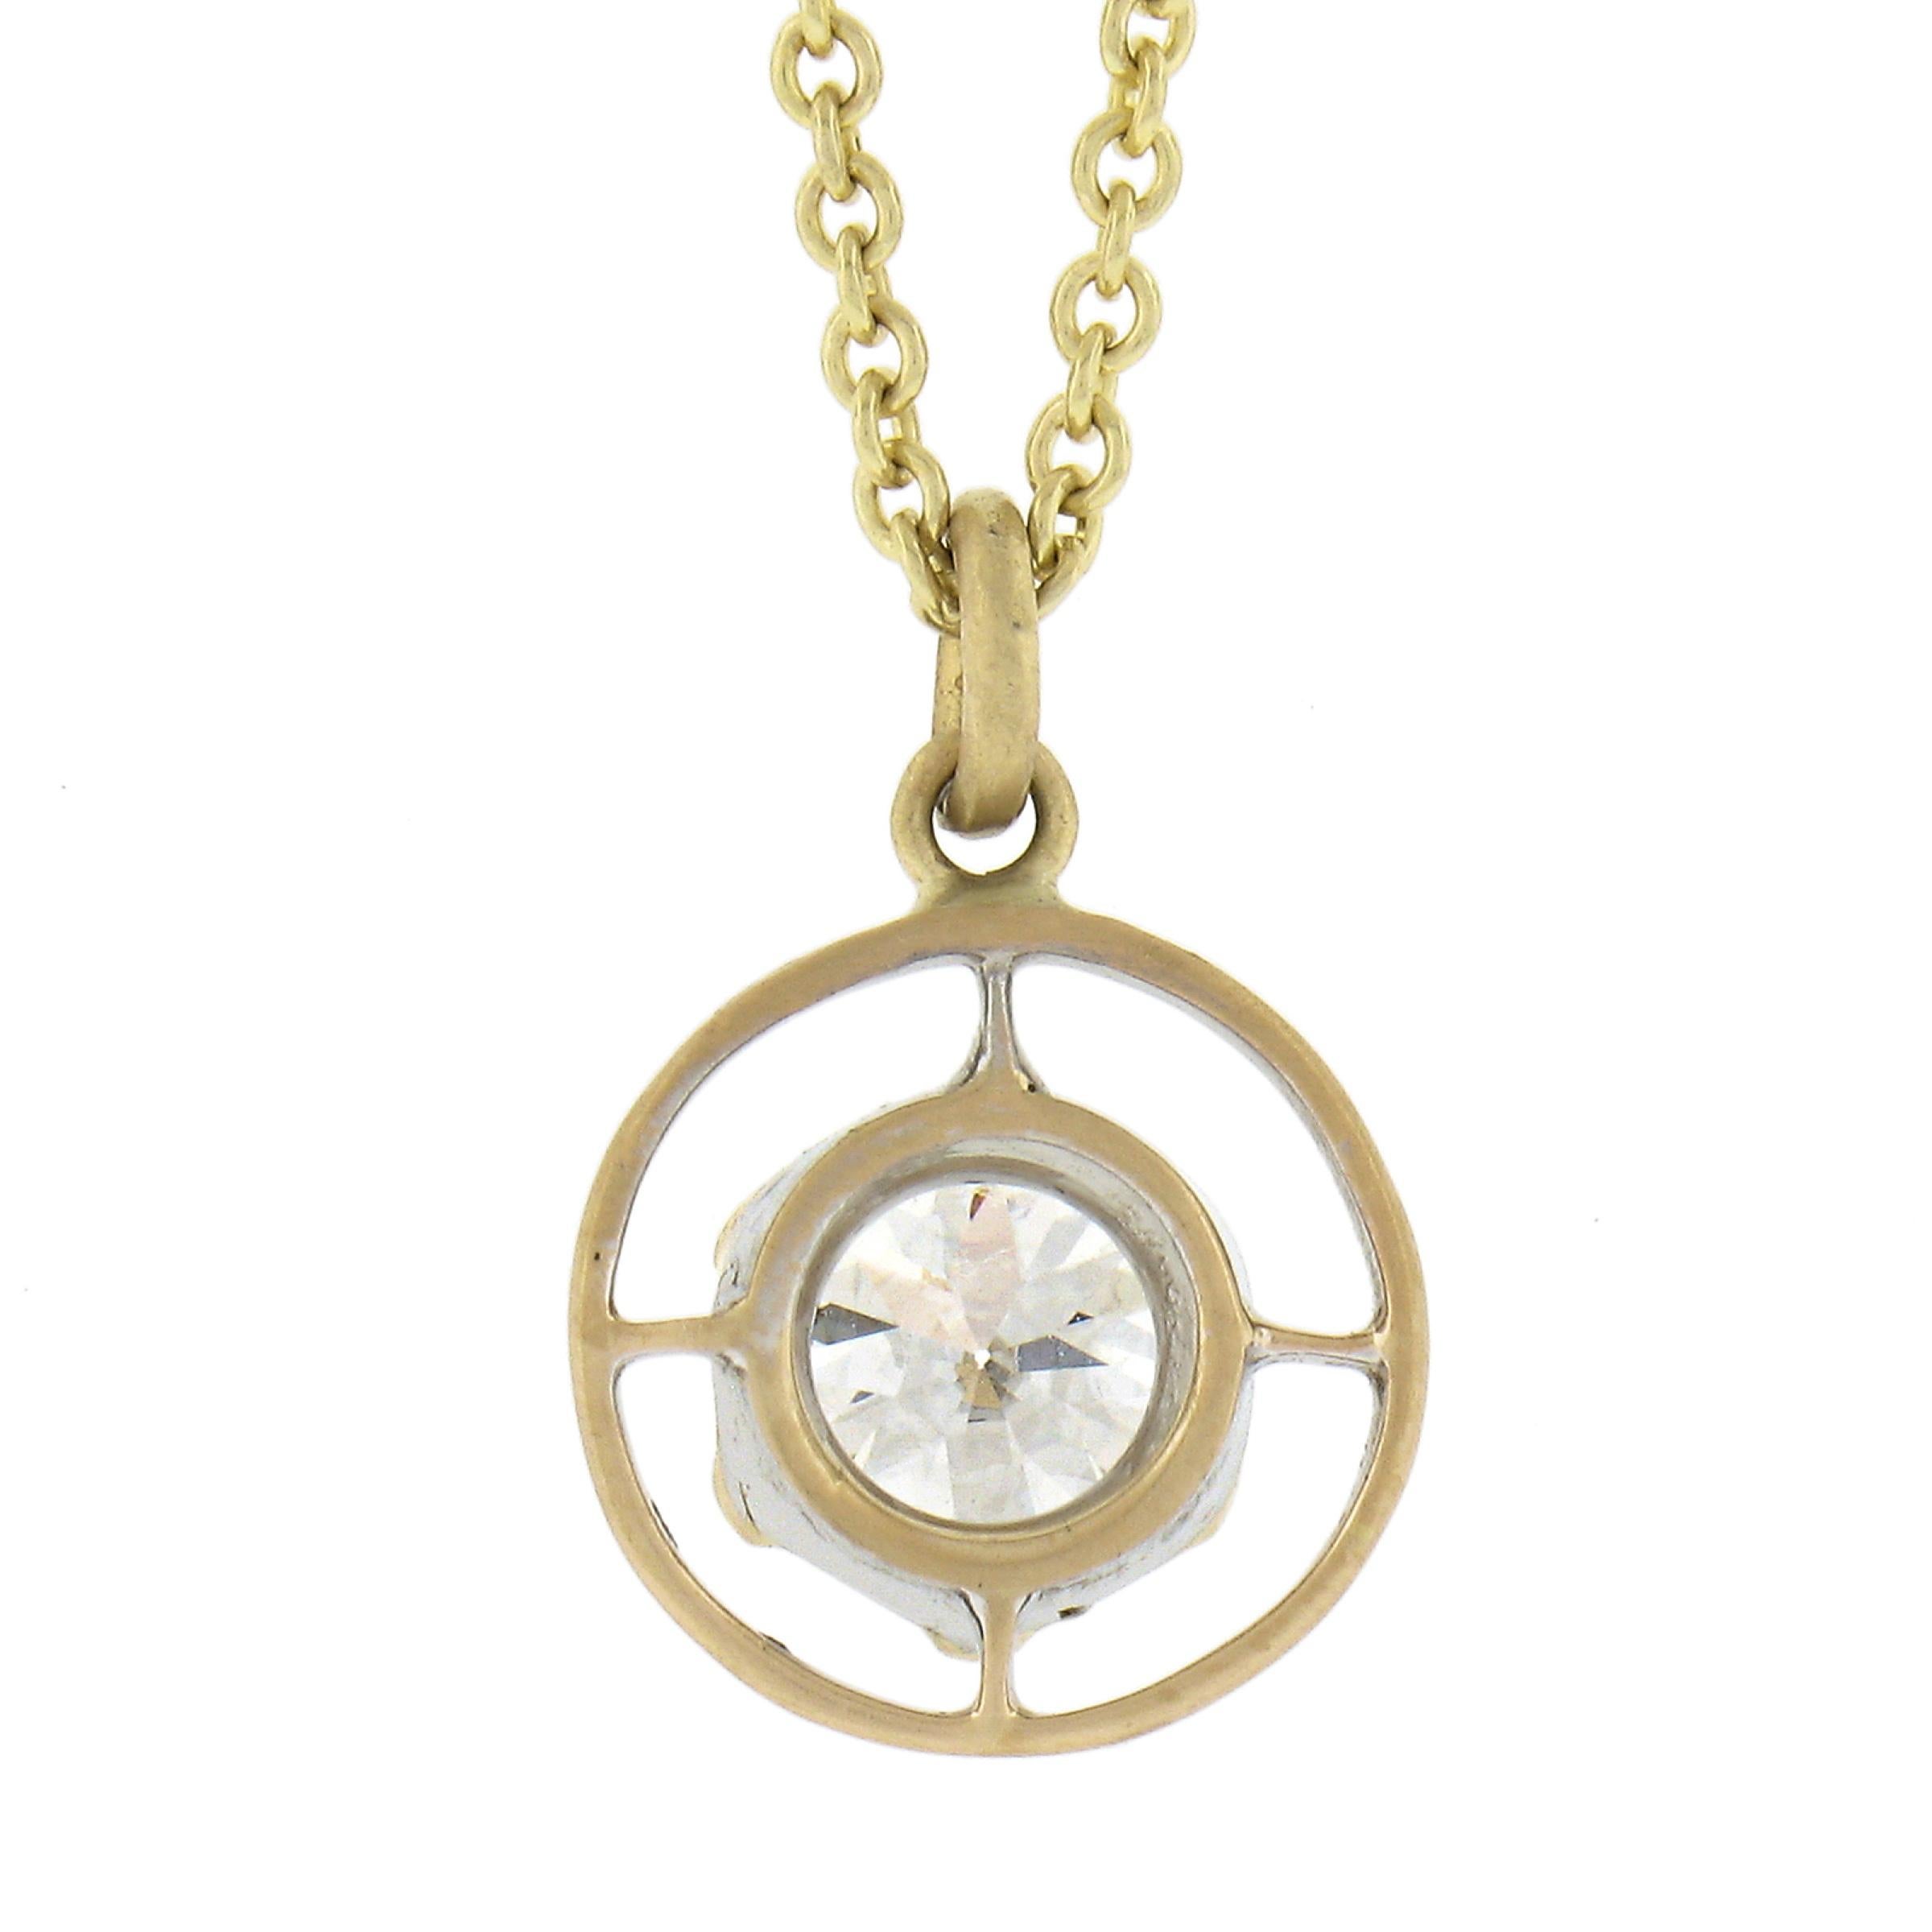 Antique 14k Gold .69ct GIA Round Prong Diamond Solitaire Target Pendant & Chain For Sale 2